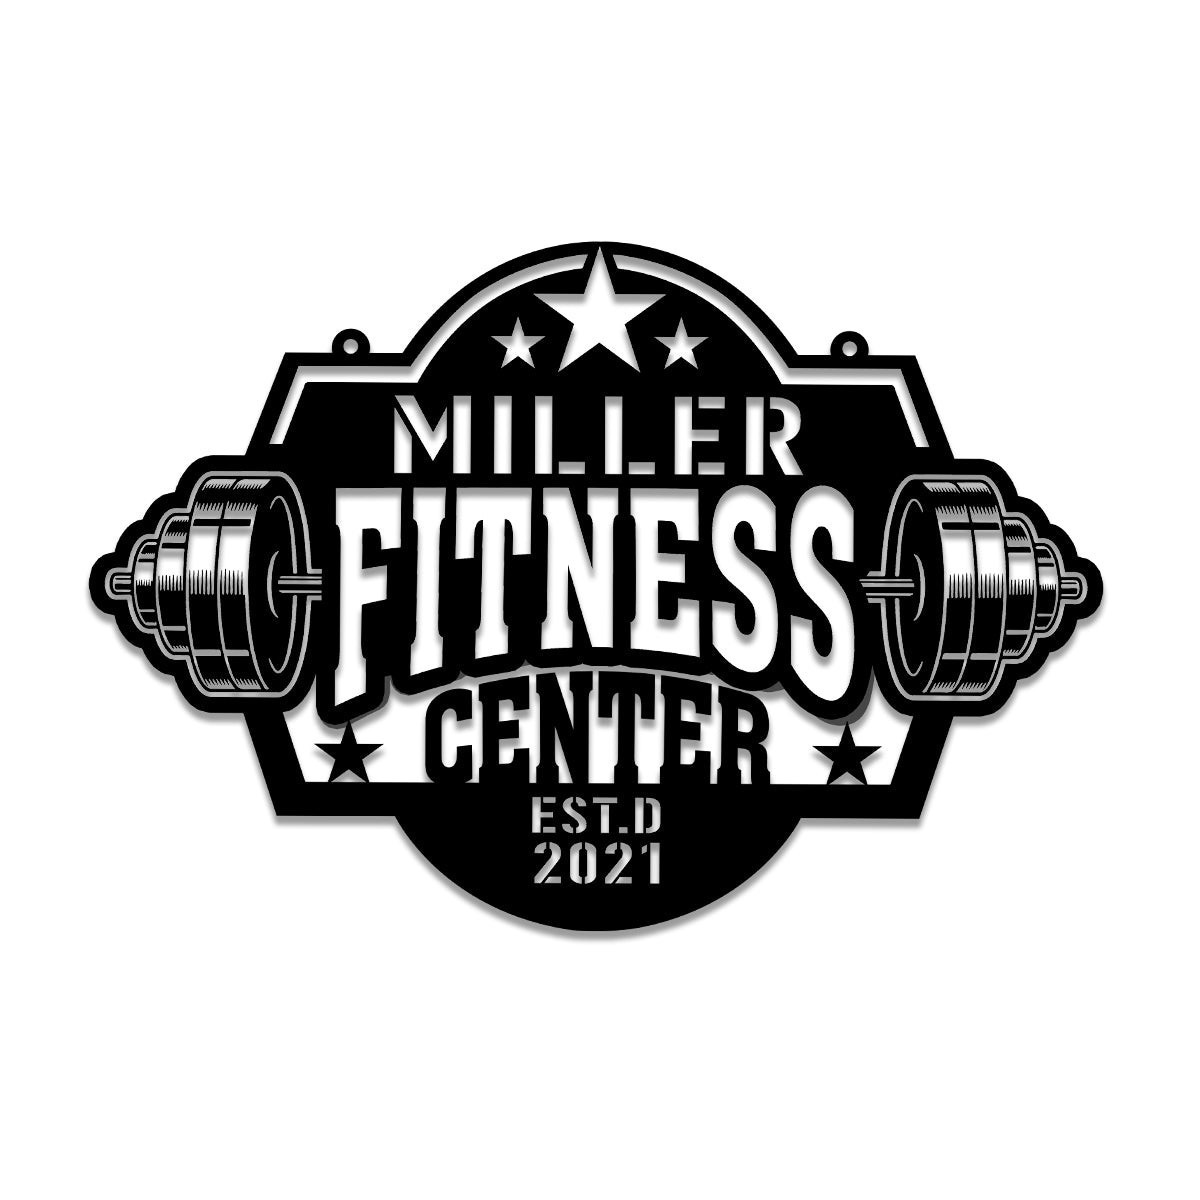 Personalized Weights Fitness Center Metal Gym Sign, Cross Fit Club, Art Gift For Him, Metal Laser Cut Metal Signs Custom Gift Ideas 12x12IN